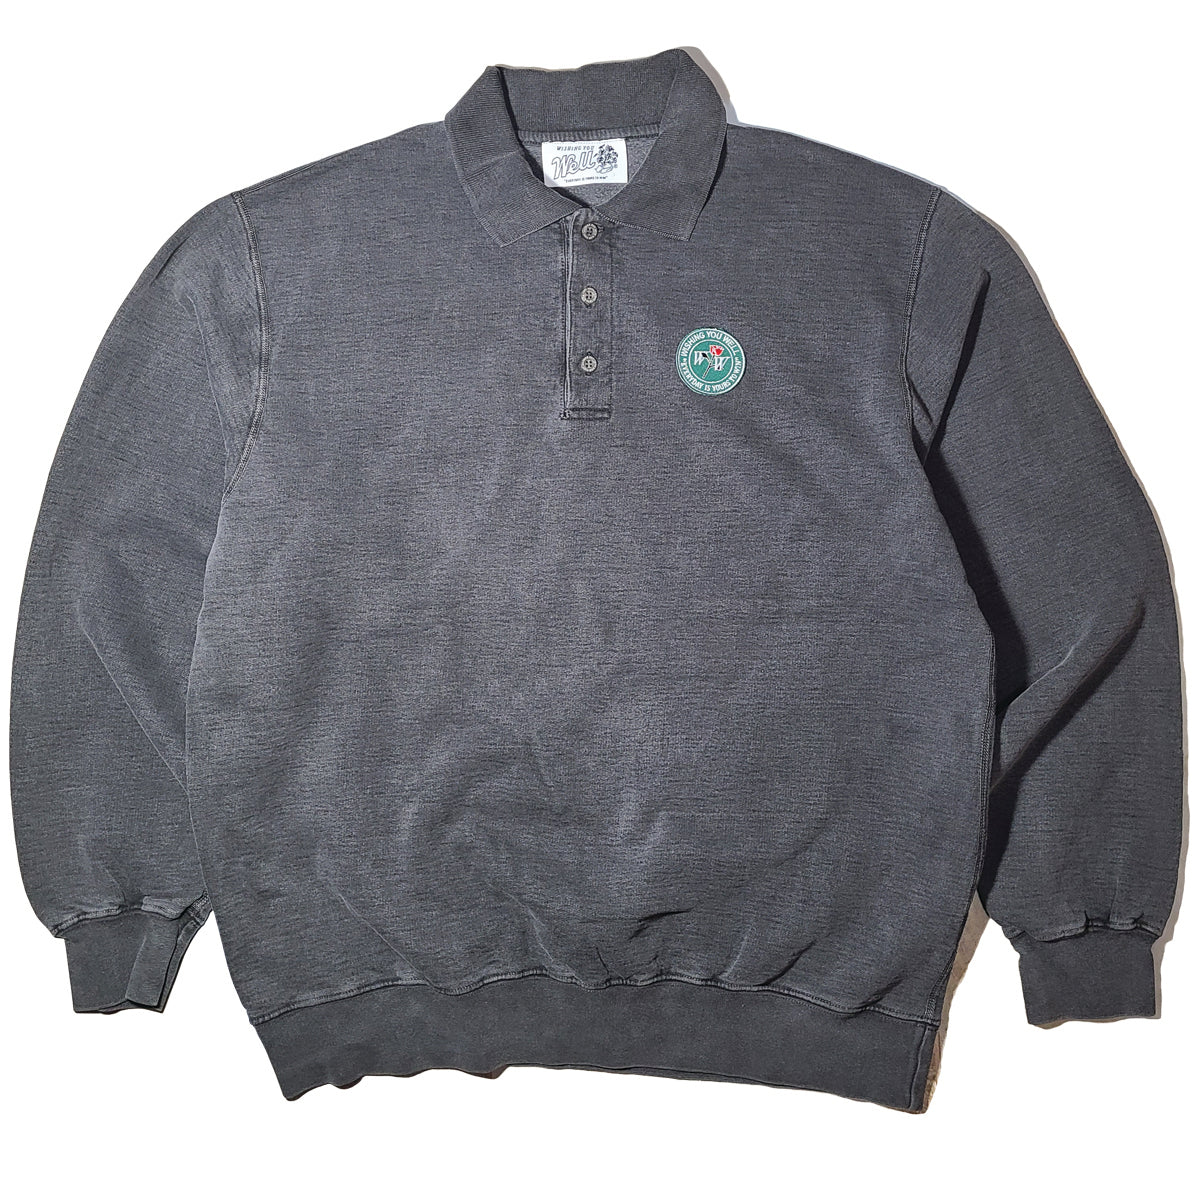 IVY ROSE RUGBY CREWNECK SWEATER (COAL/GARMENT DYED)